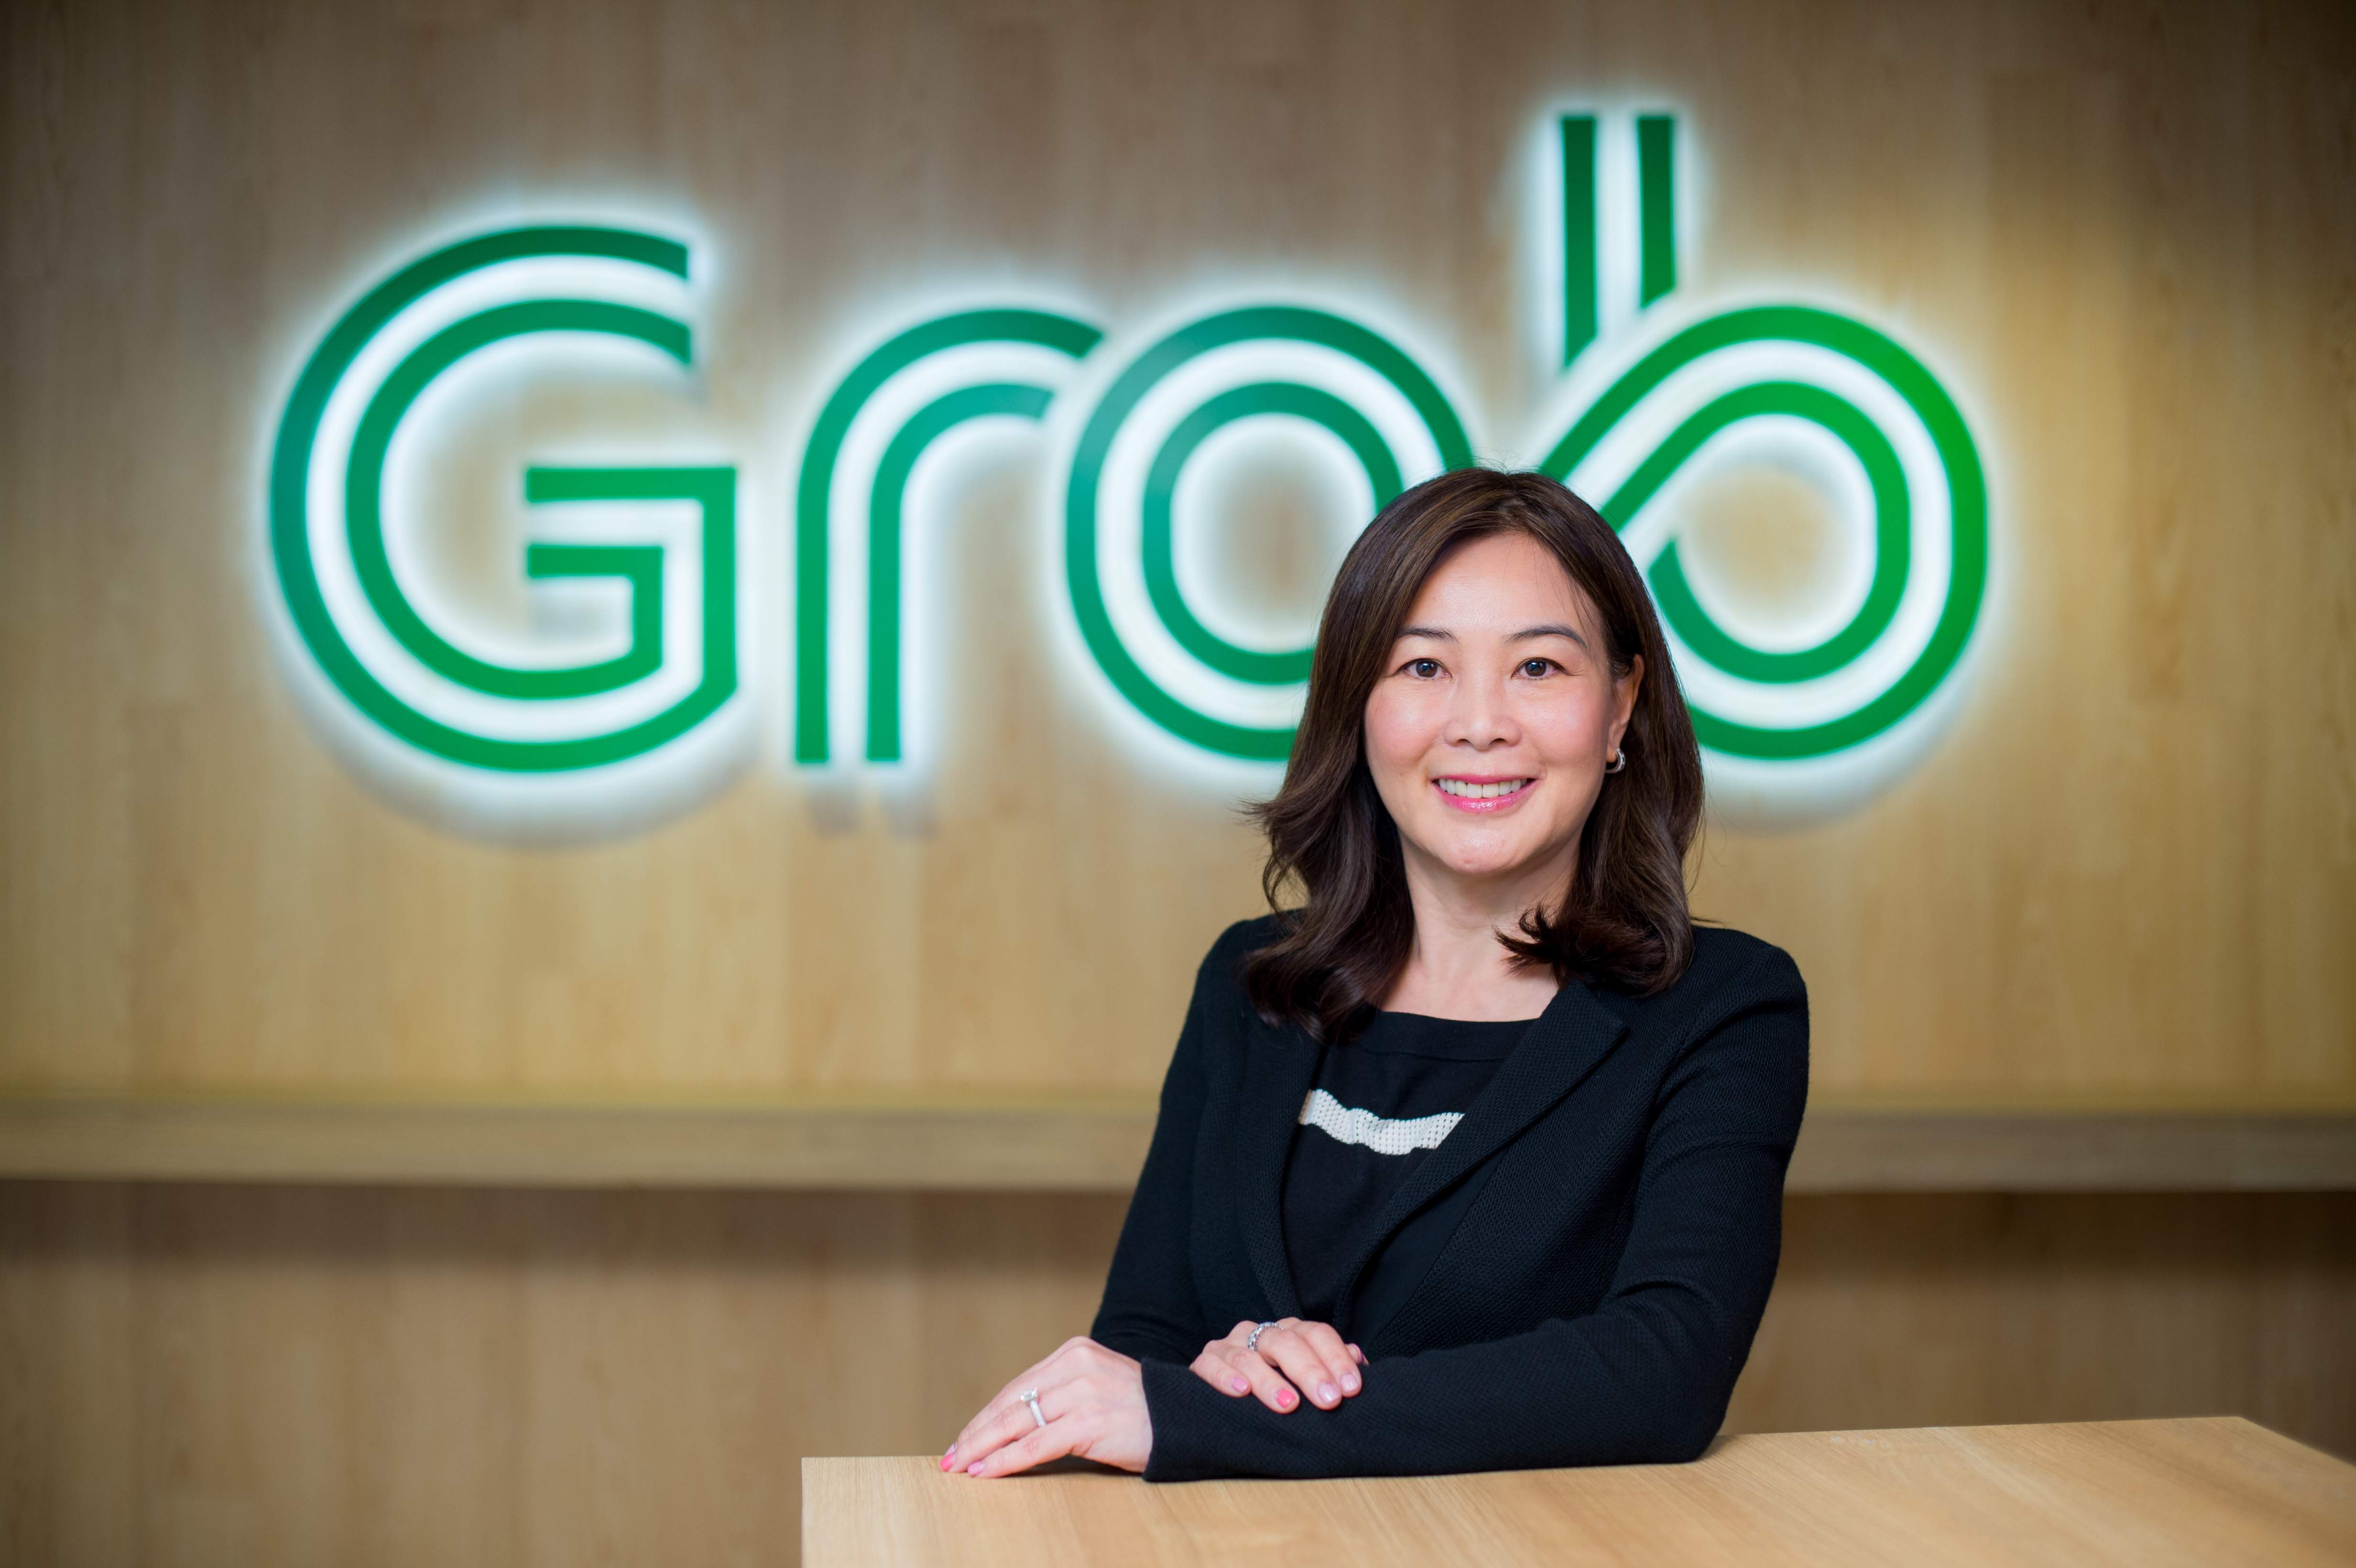 Ooi Huey Tyng, managing director of GrabPay Singapore, Malaysia, and Philippines. © MovingStills Photography